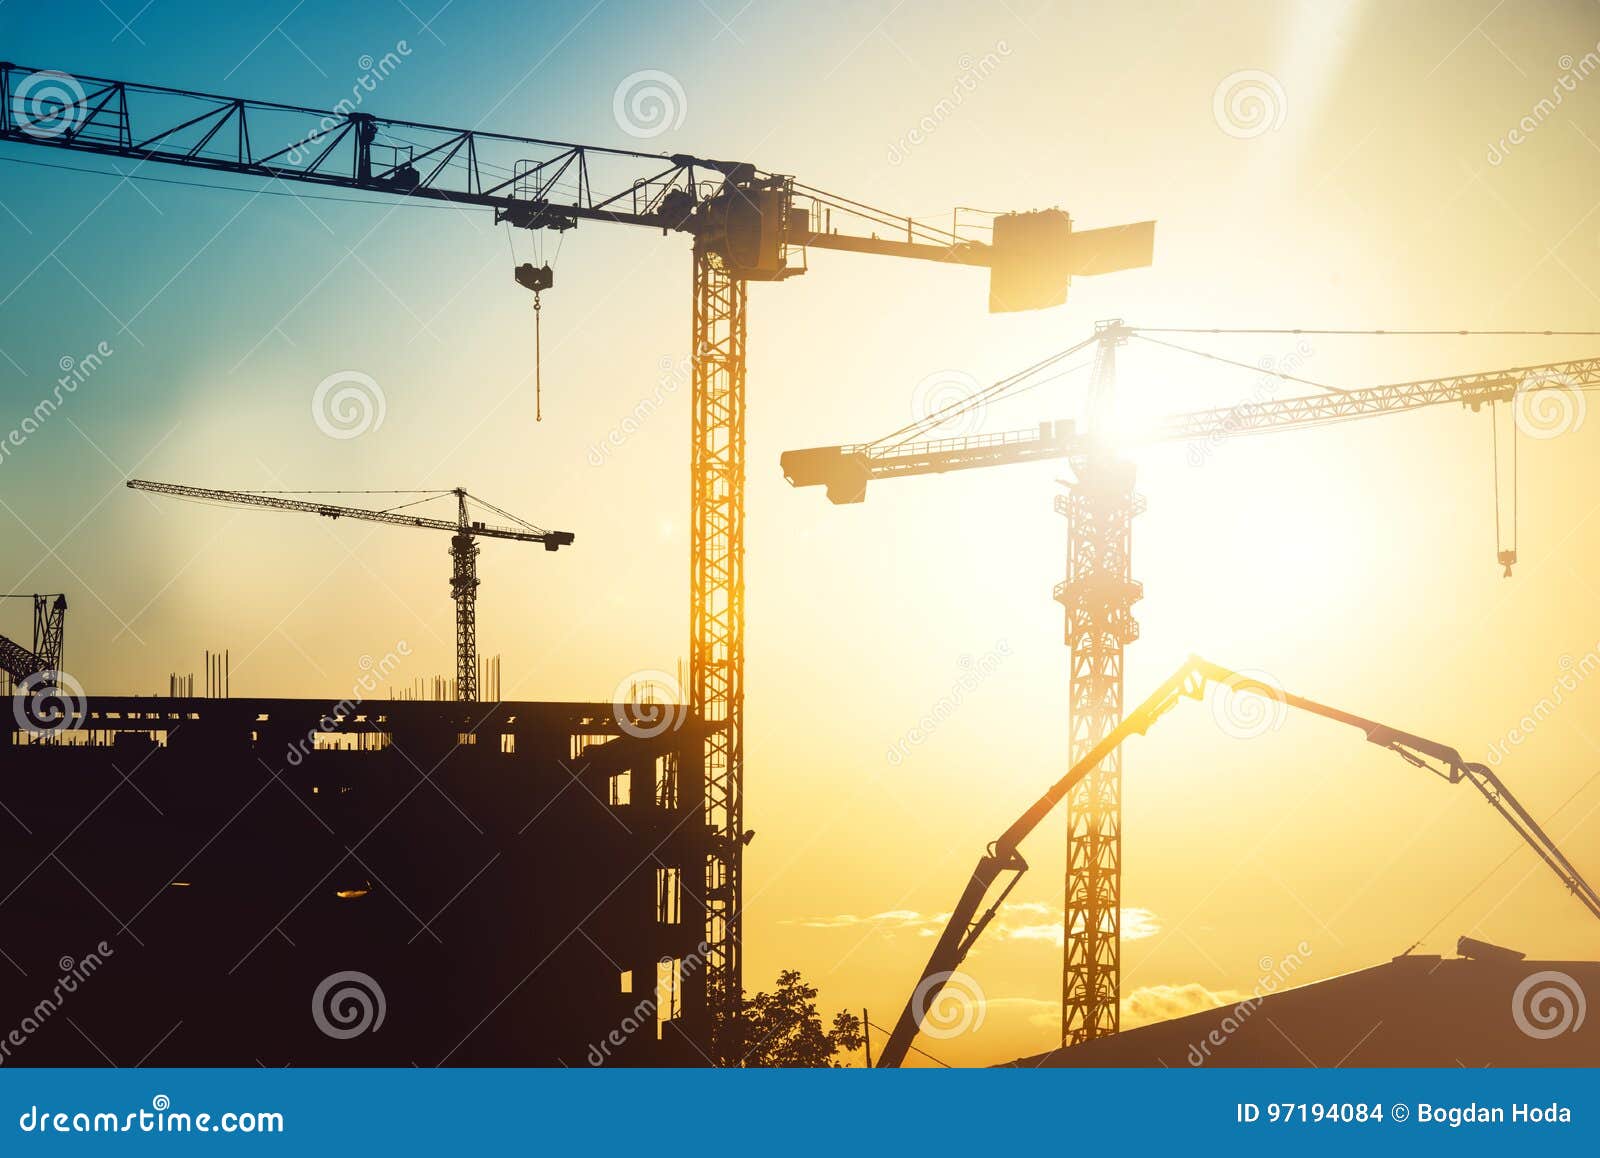 industrial heavy duty construction site with tower cranes and building silhouettes